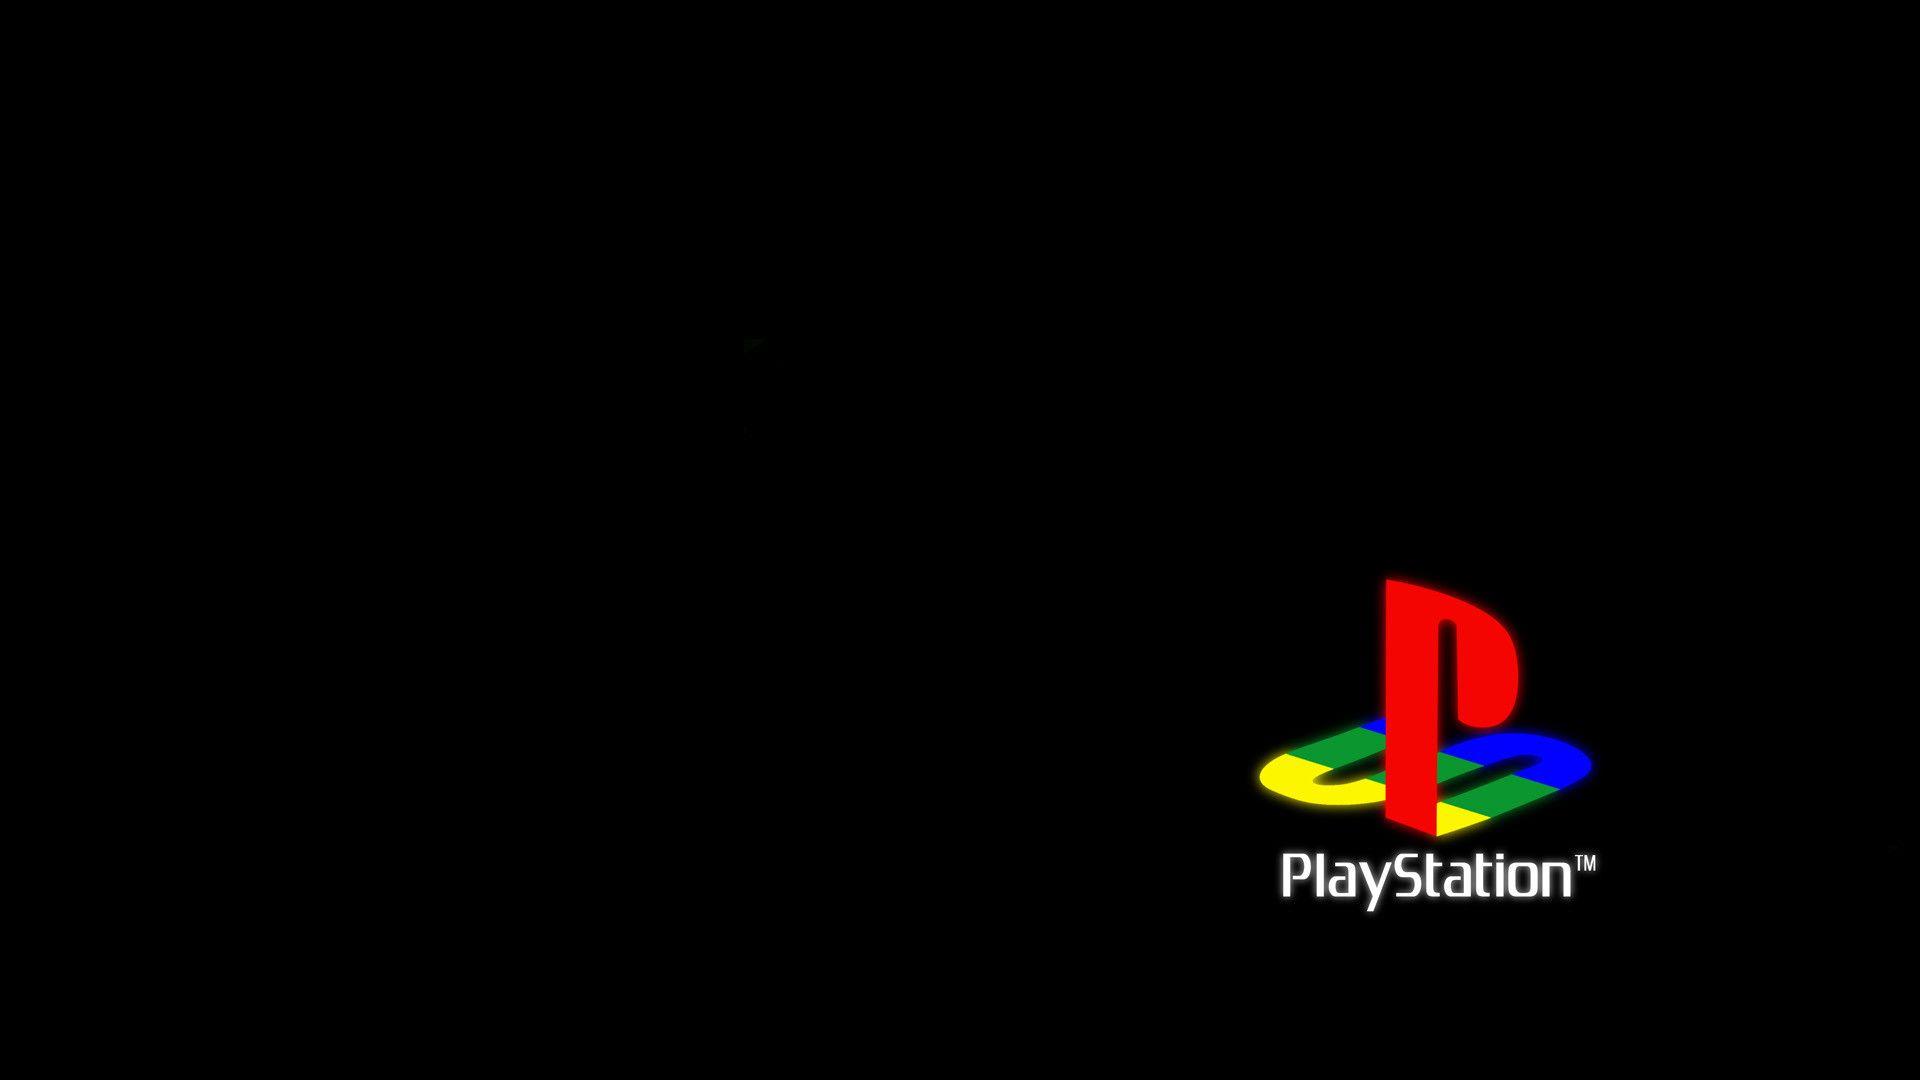 Download wallpapers PlayStation red logo 4k red brickwall PlayStation  logo brands PlayStation neon logo PlayStation for desktop with  resolution 3840x2400 High Quality HD pictures wallpapers